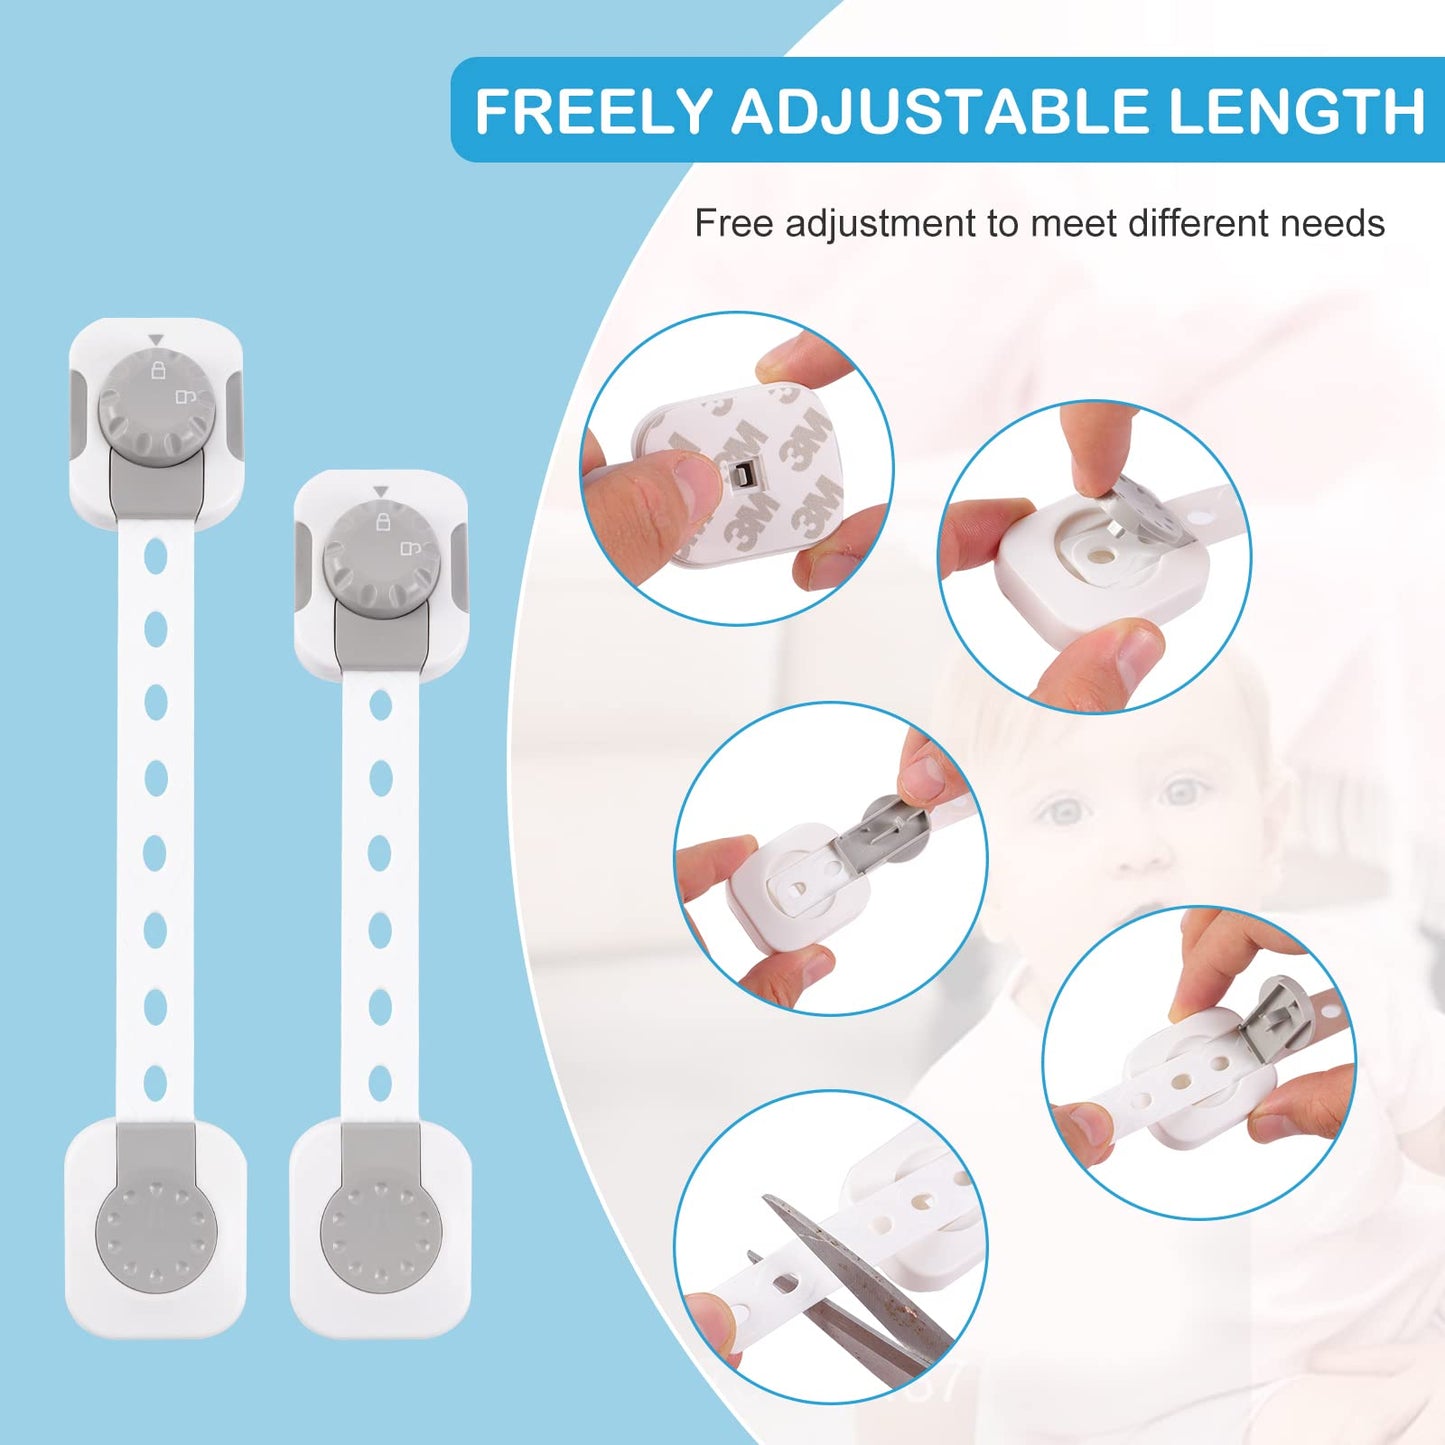 Sky-Touch Baby Safety Lock，Child Safety Locks，Multi-Functional Adjustable Double Button Baby Anti-Clip Latch System For Cabinets, Drawers, Fridge, Closet Doors Etc（Pack Of 6）